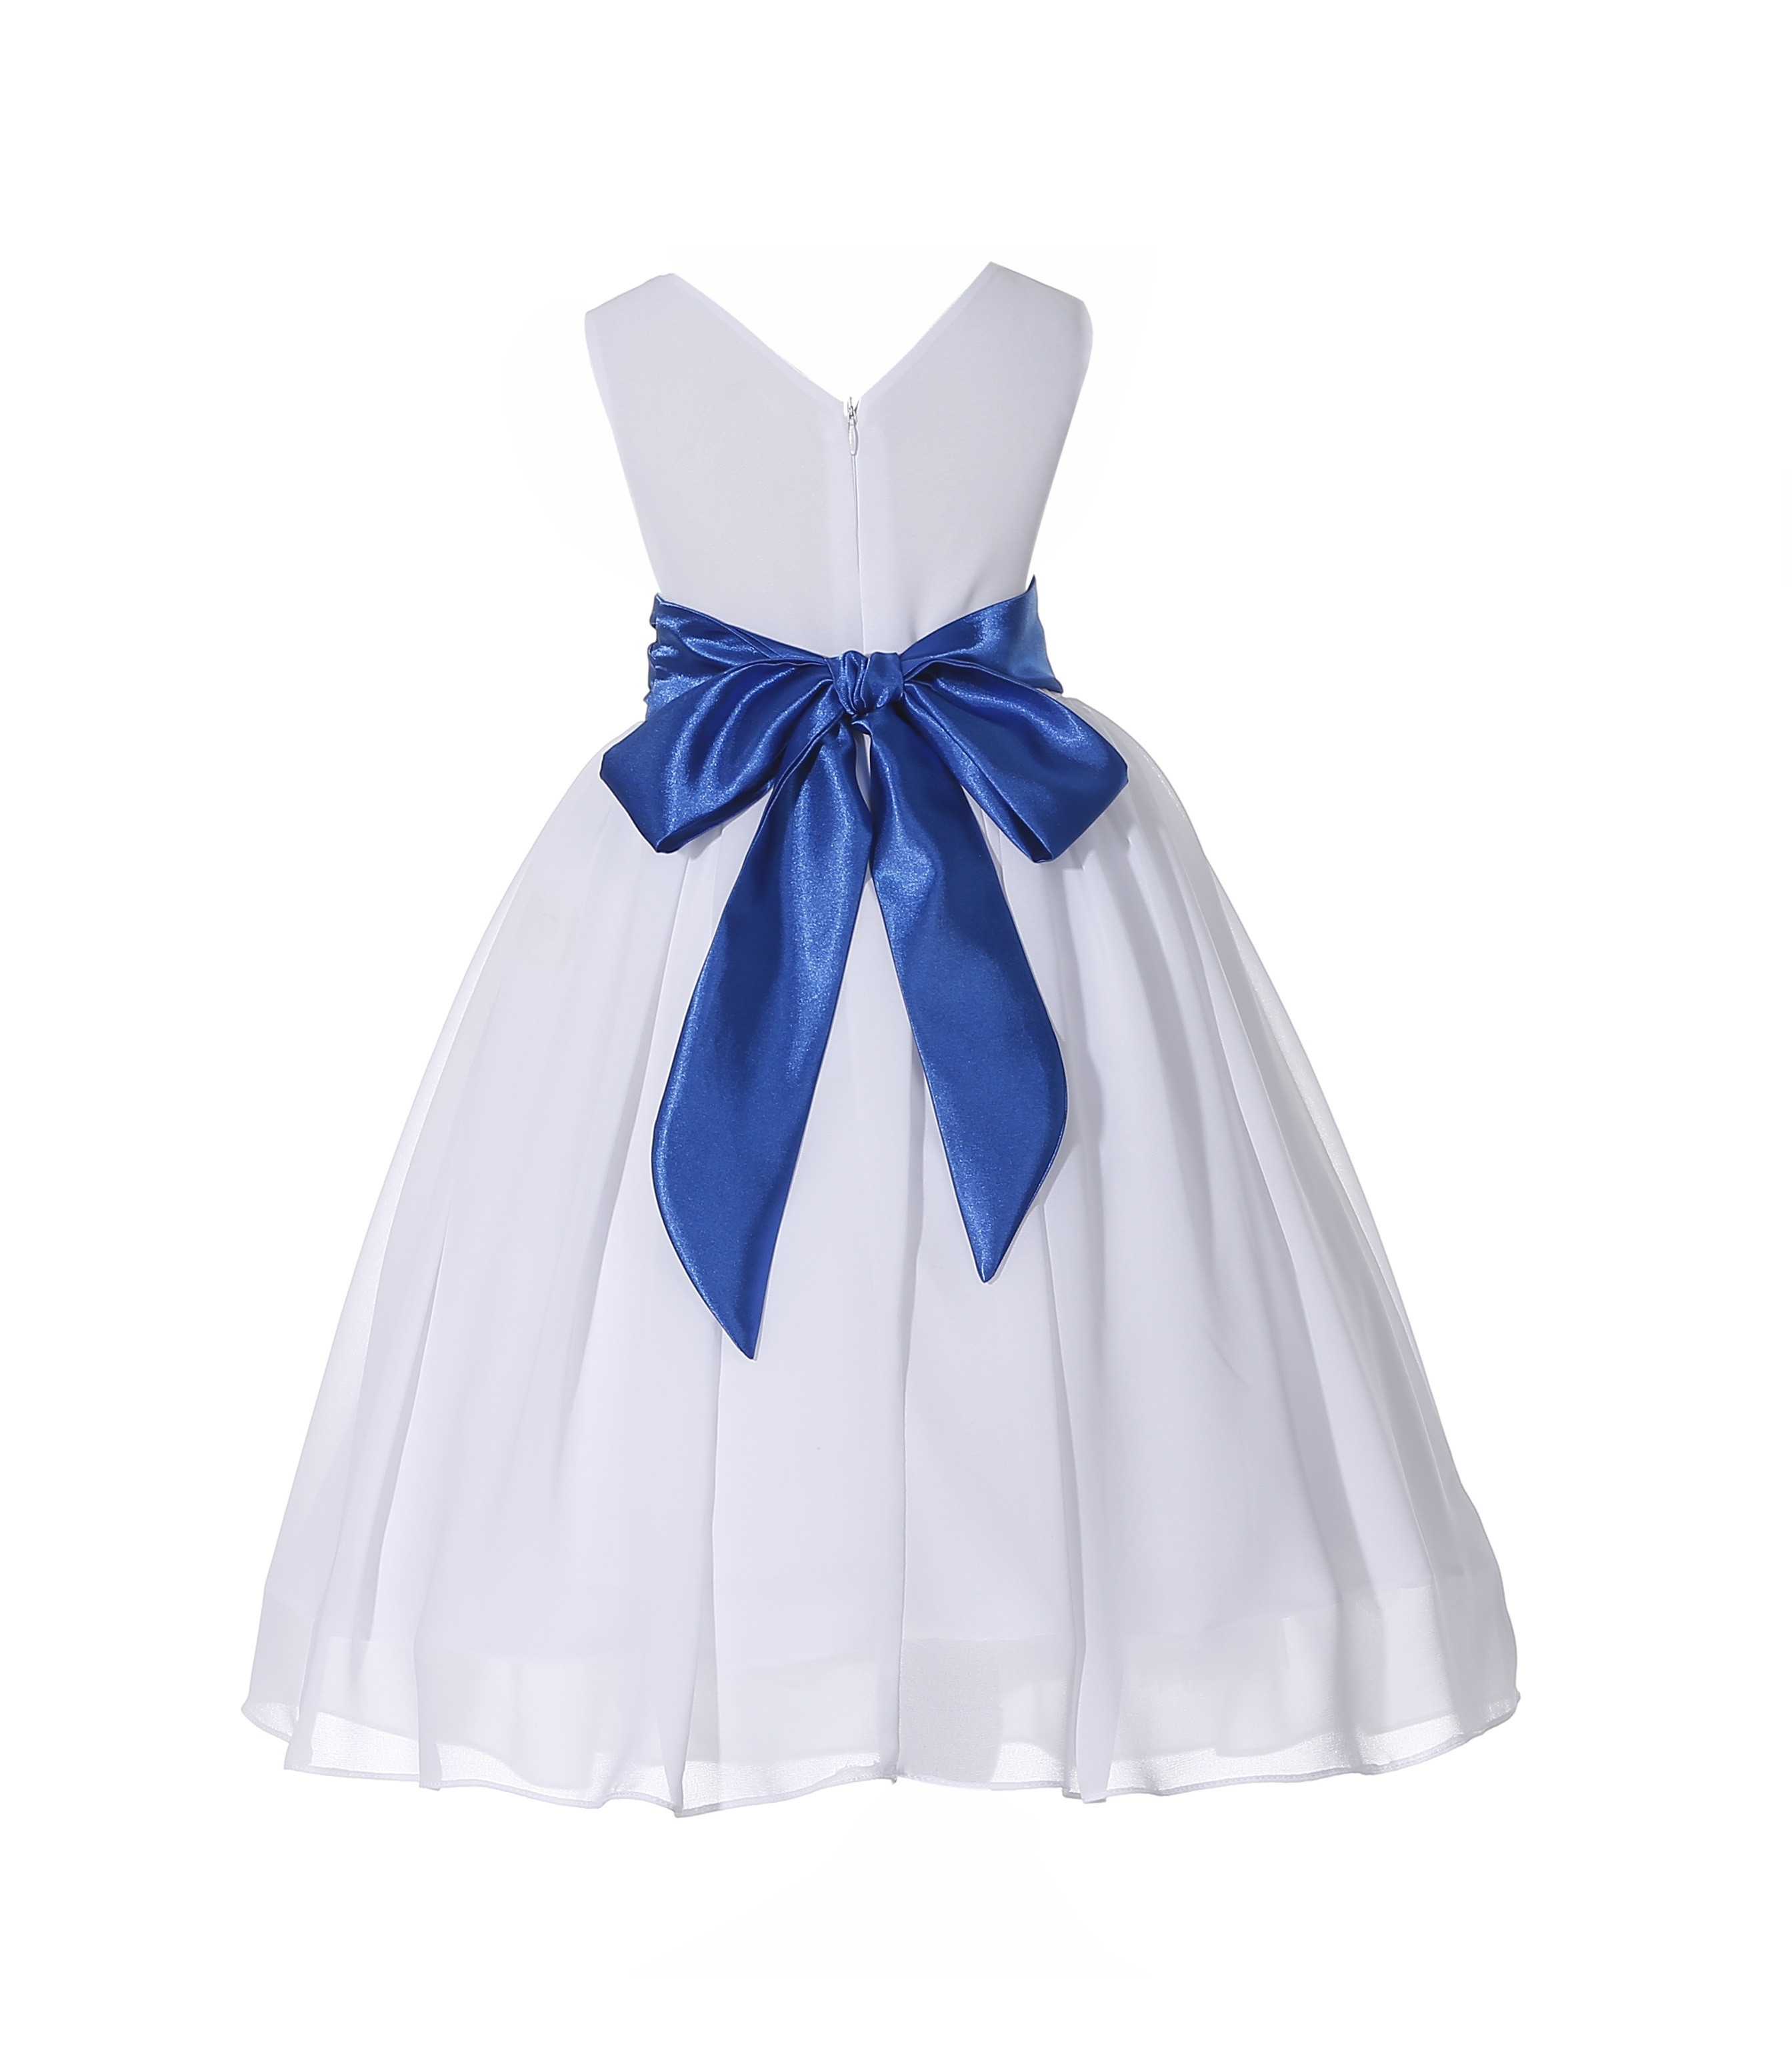 white dress with royal blue